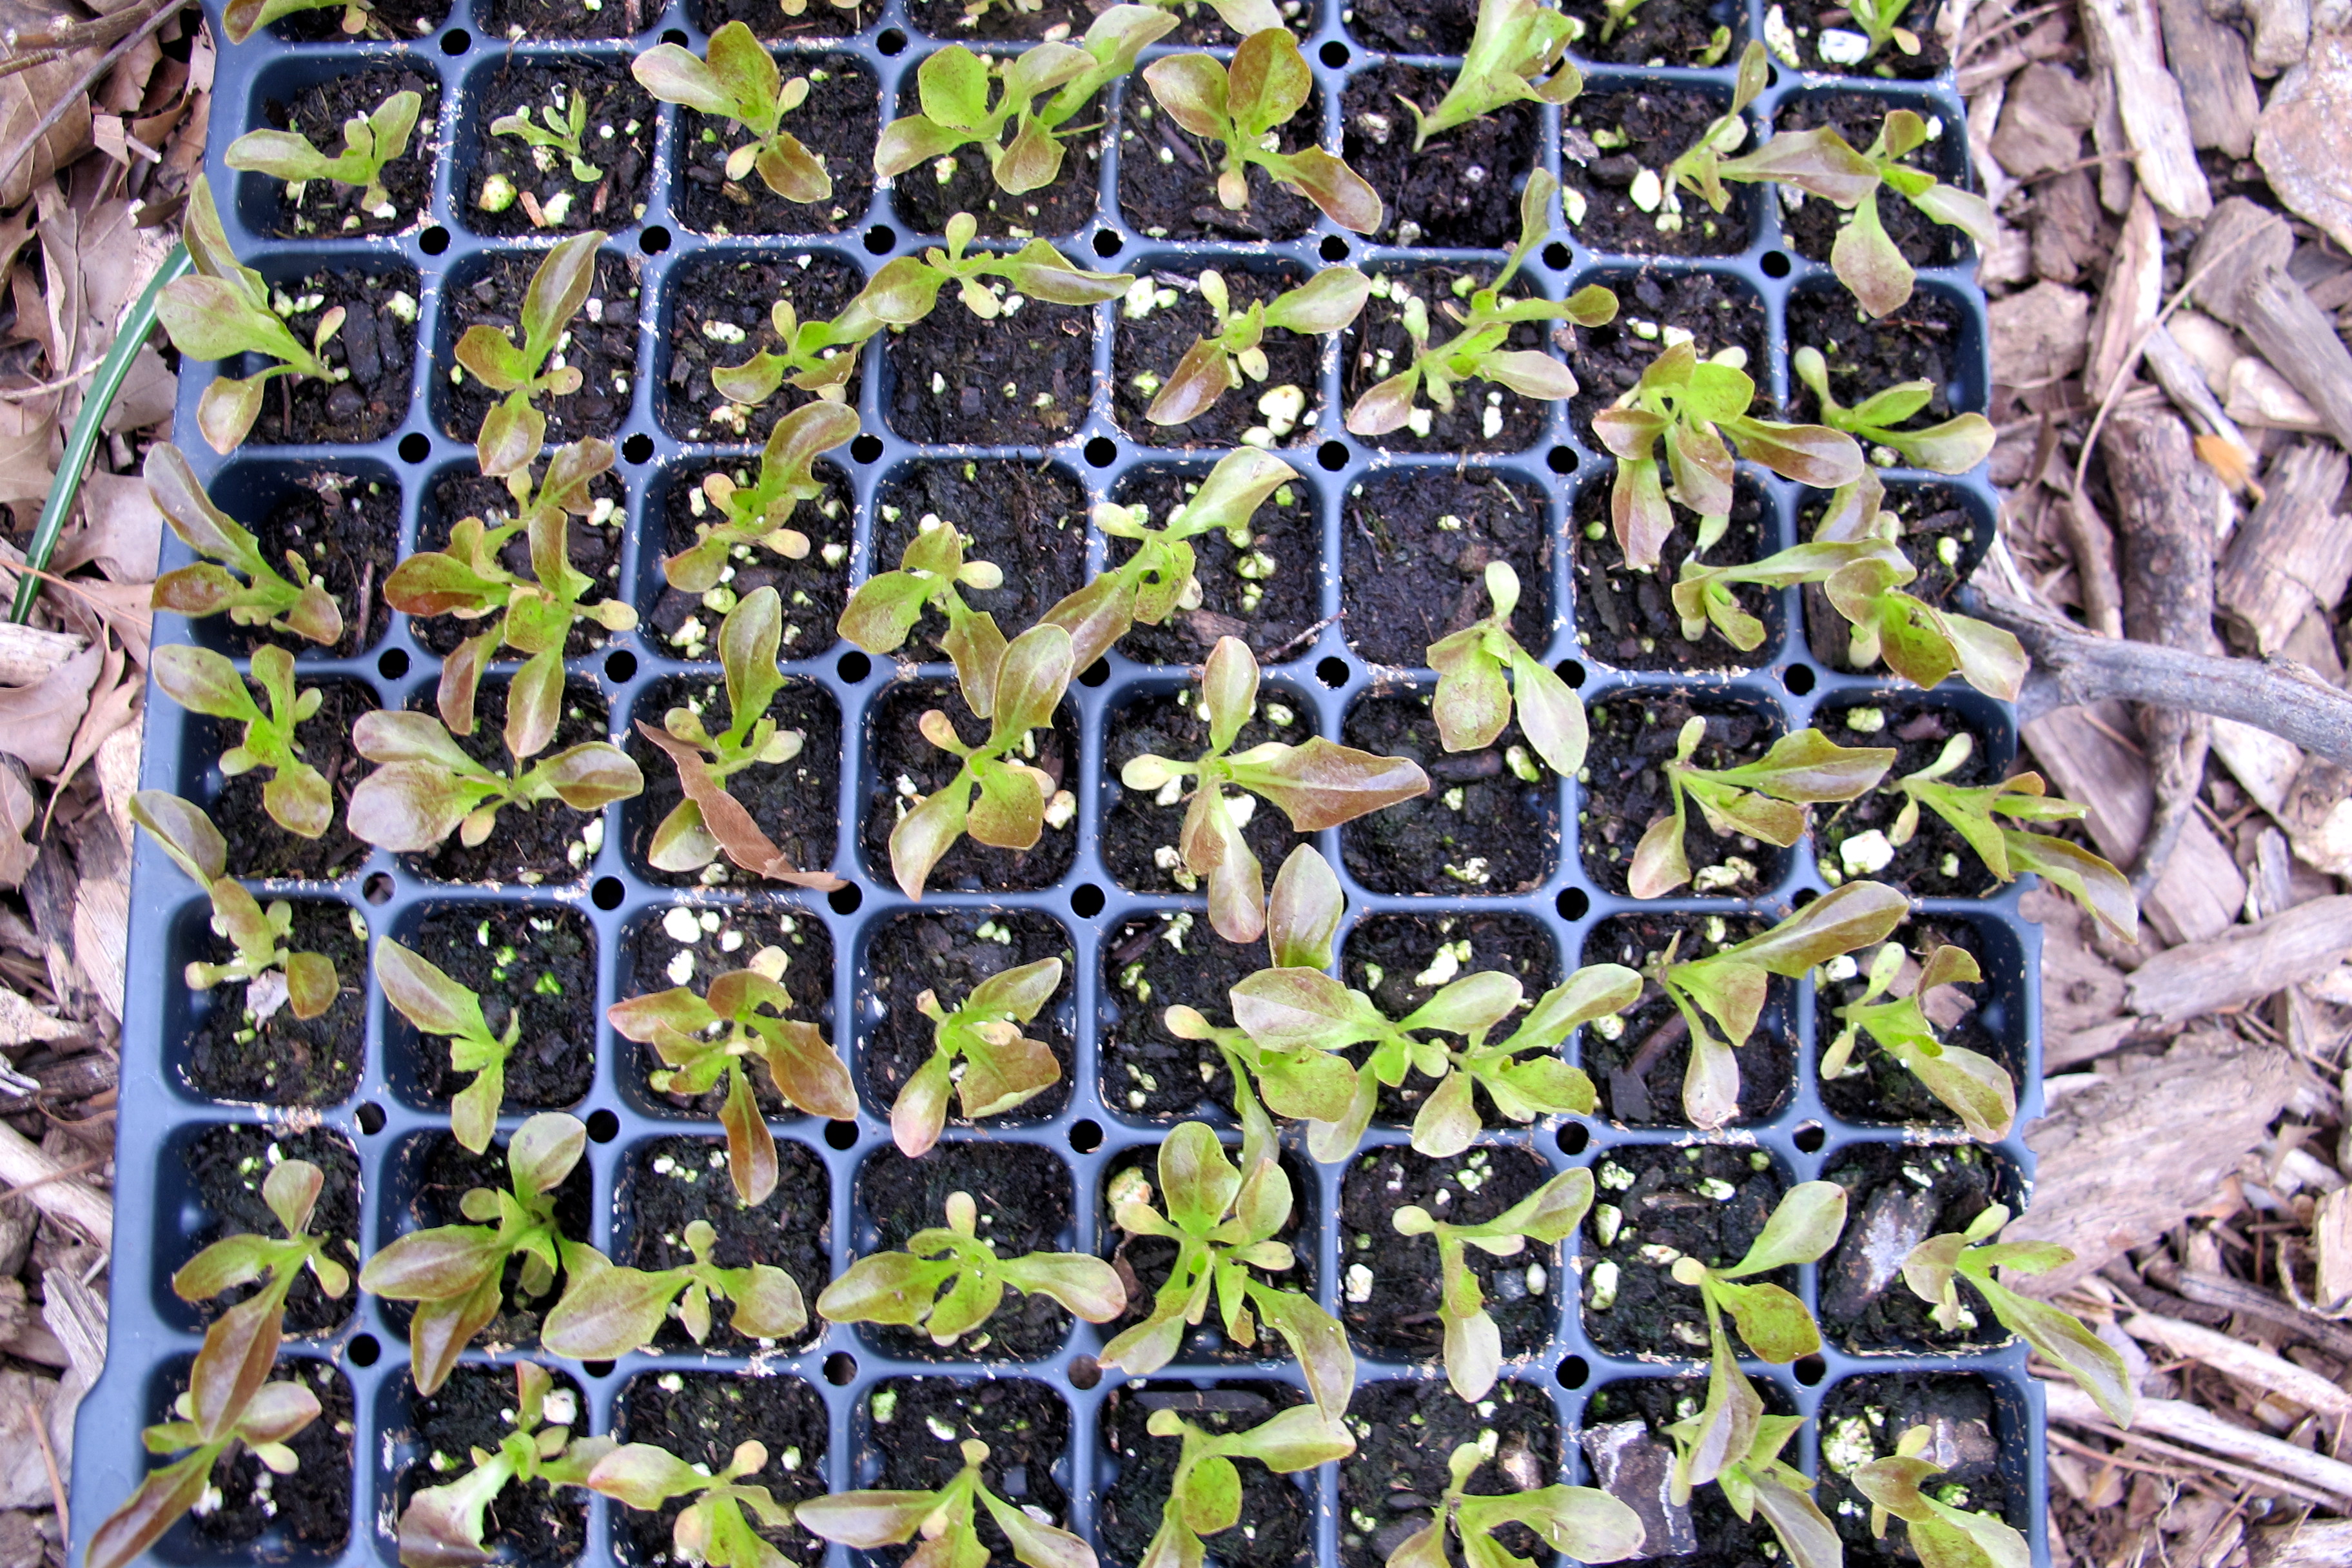 Lettuce seedlings from City Harvest waiting to be planted.